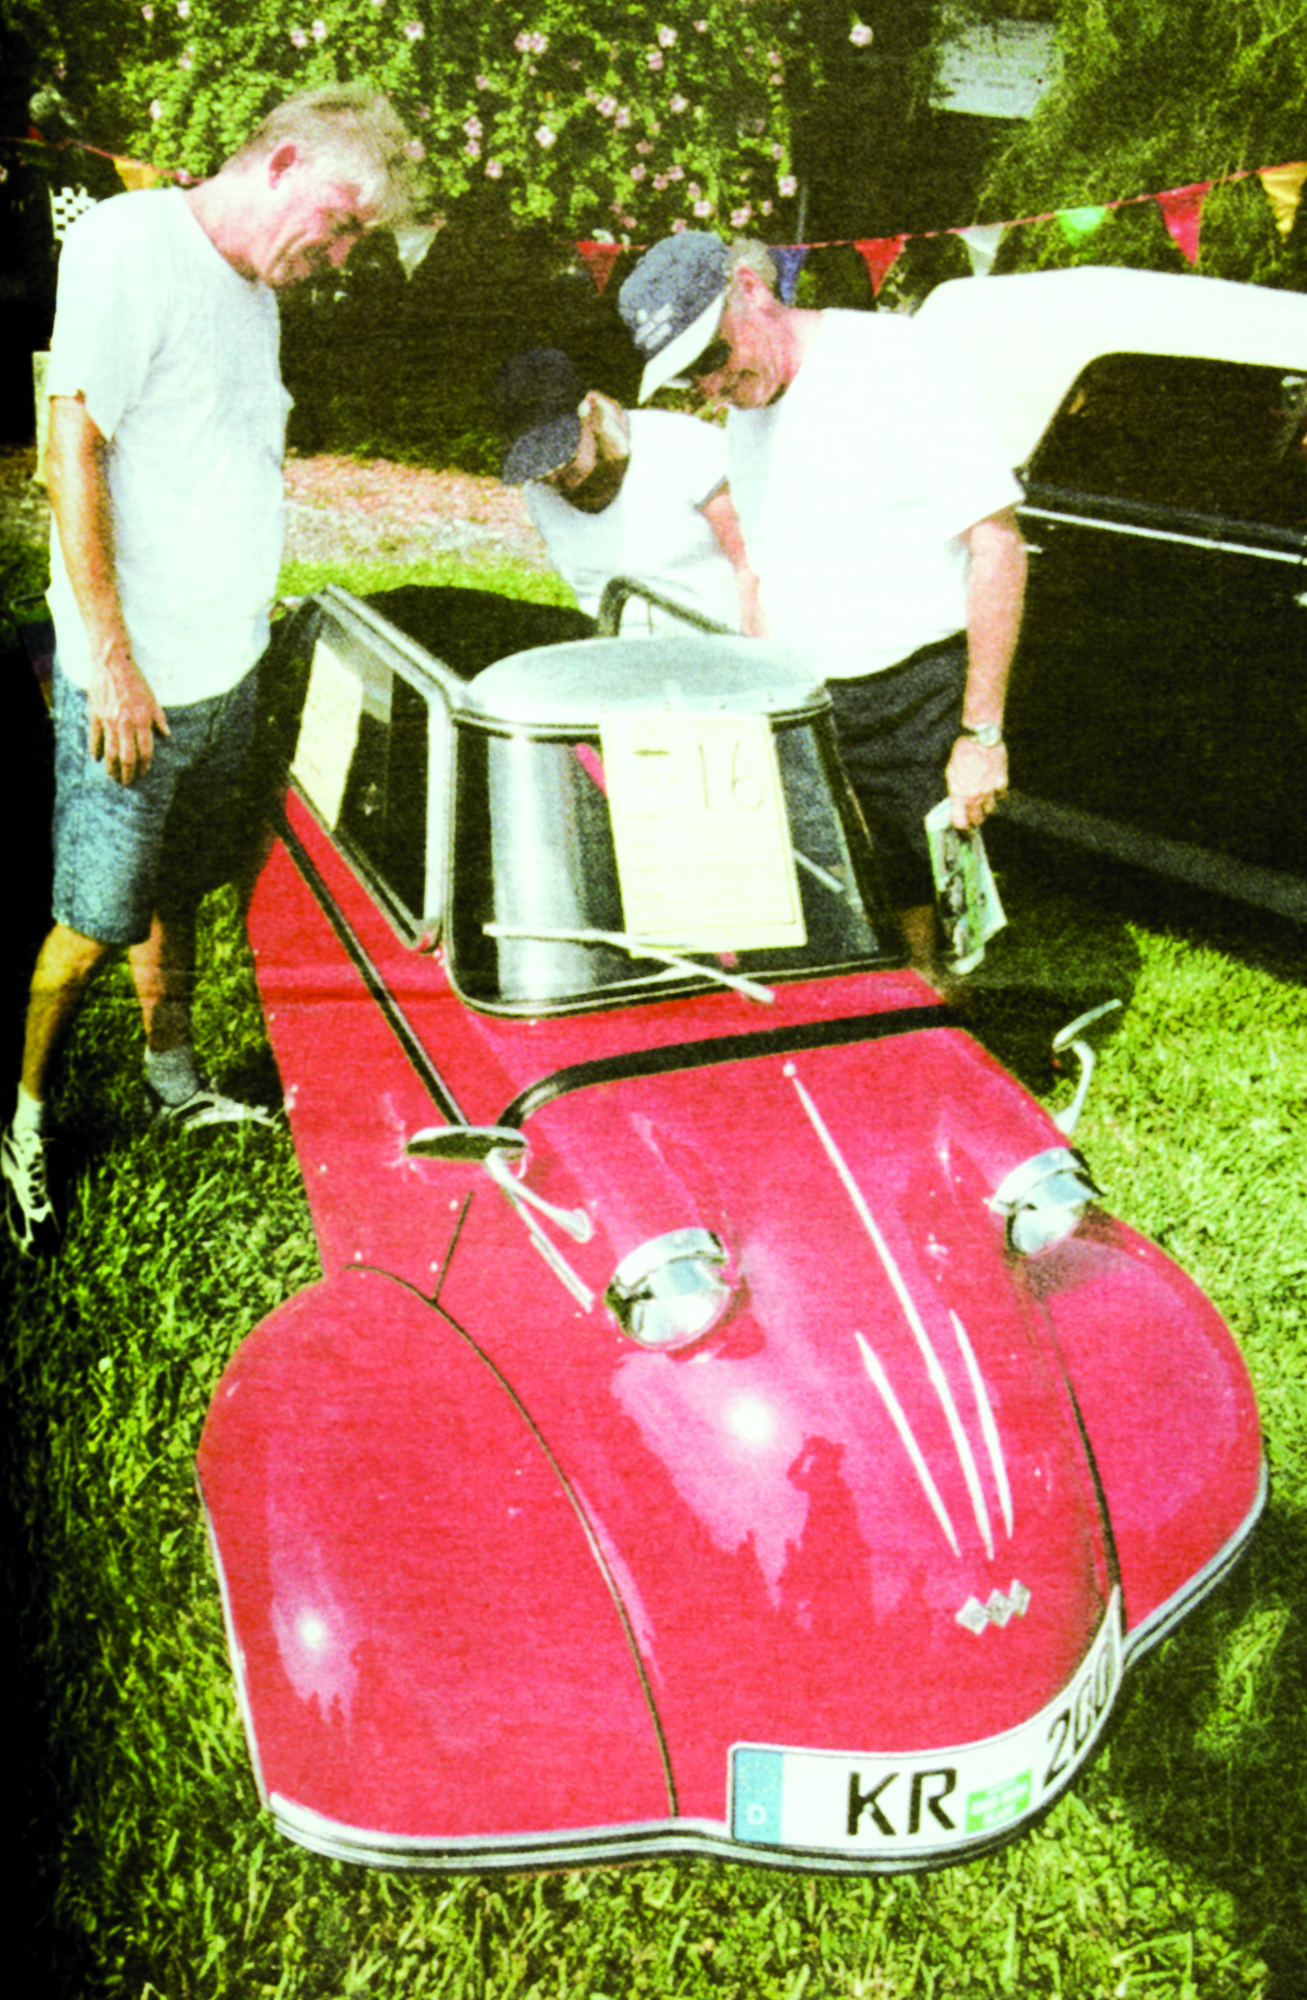 Two men check out one of the cars on display on St. Armands Circle.